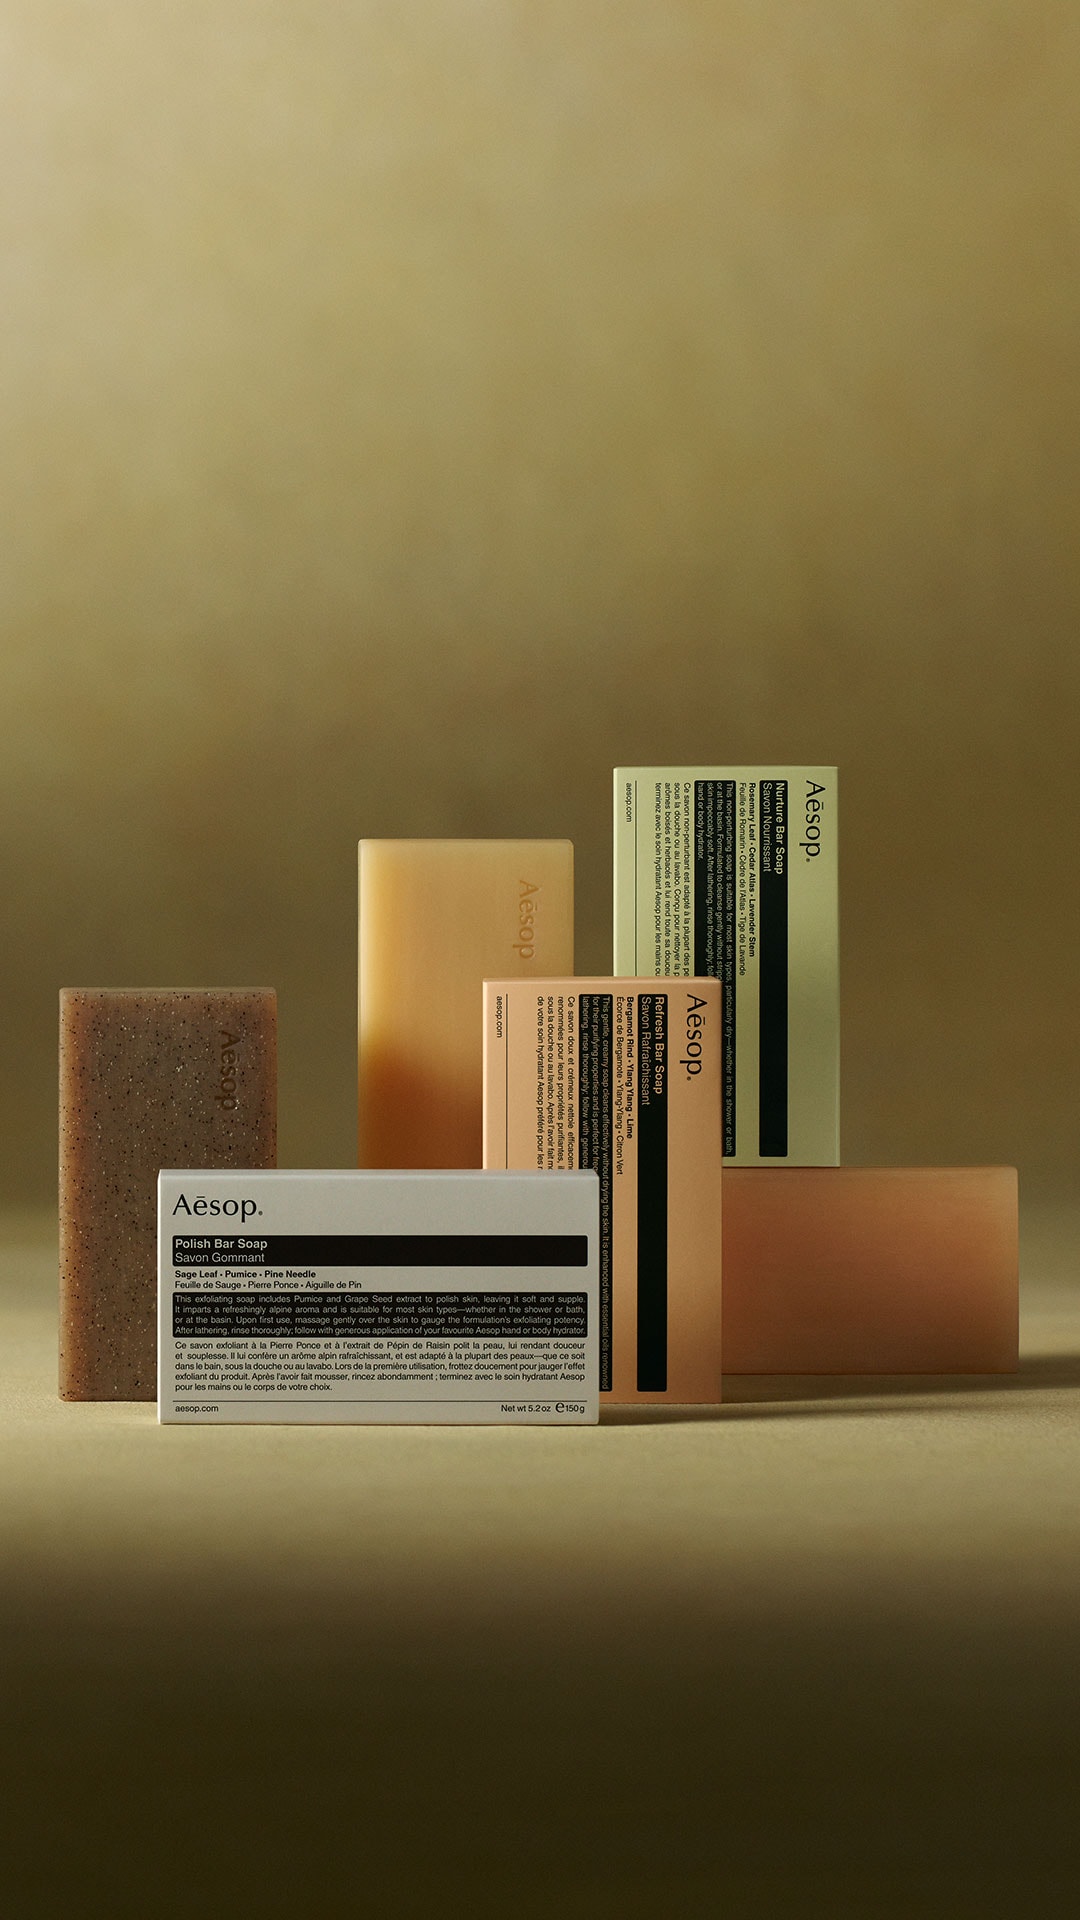 Aesop bar soaps placed next to each other on a green textured background